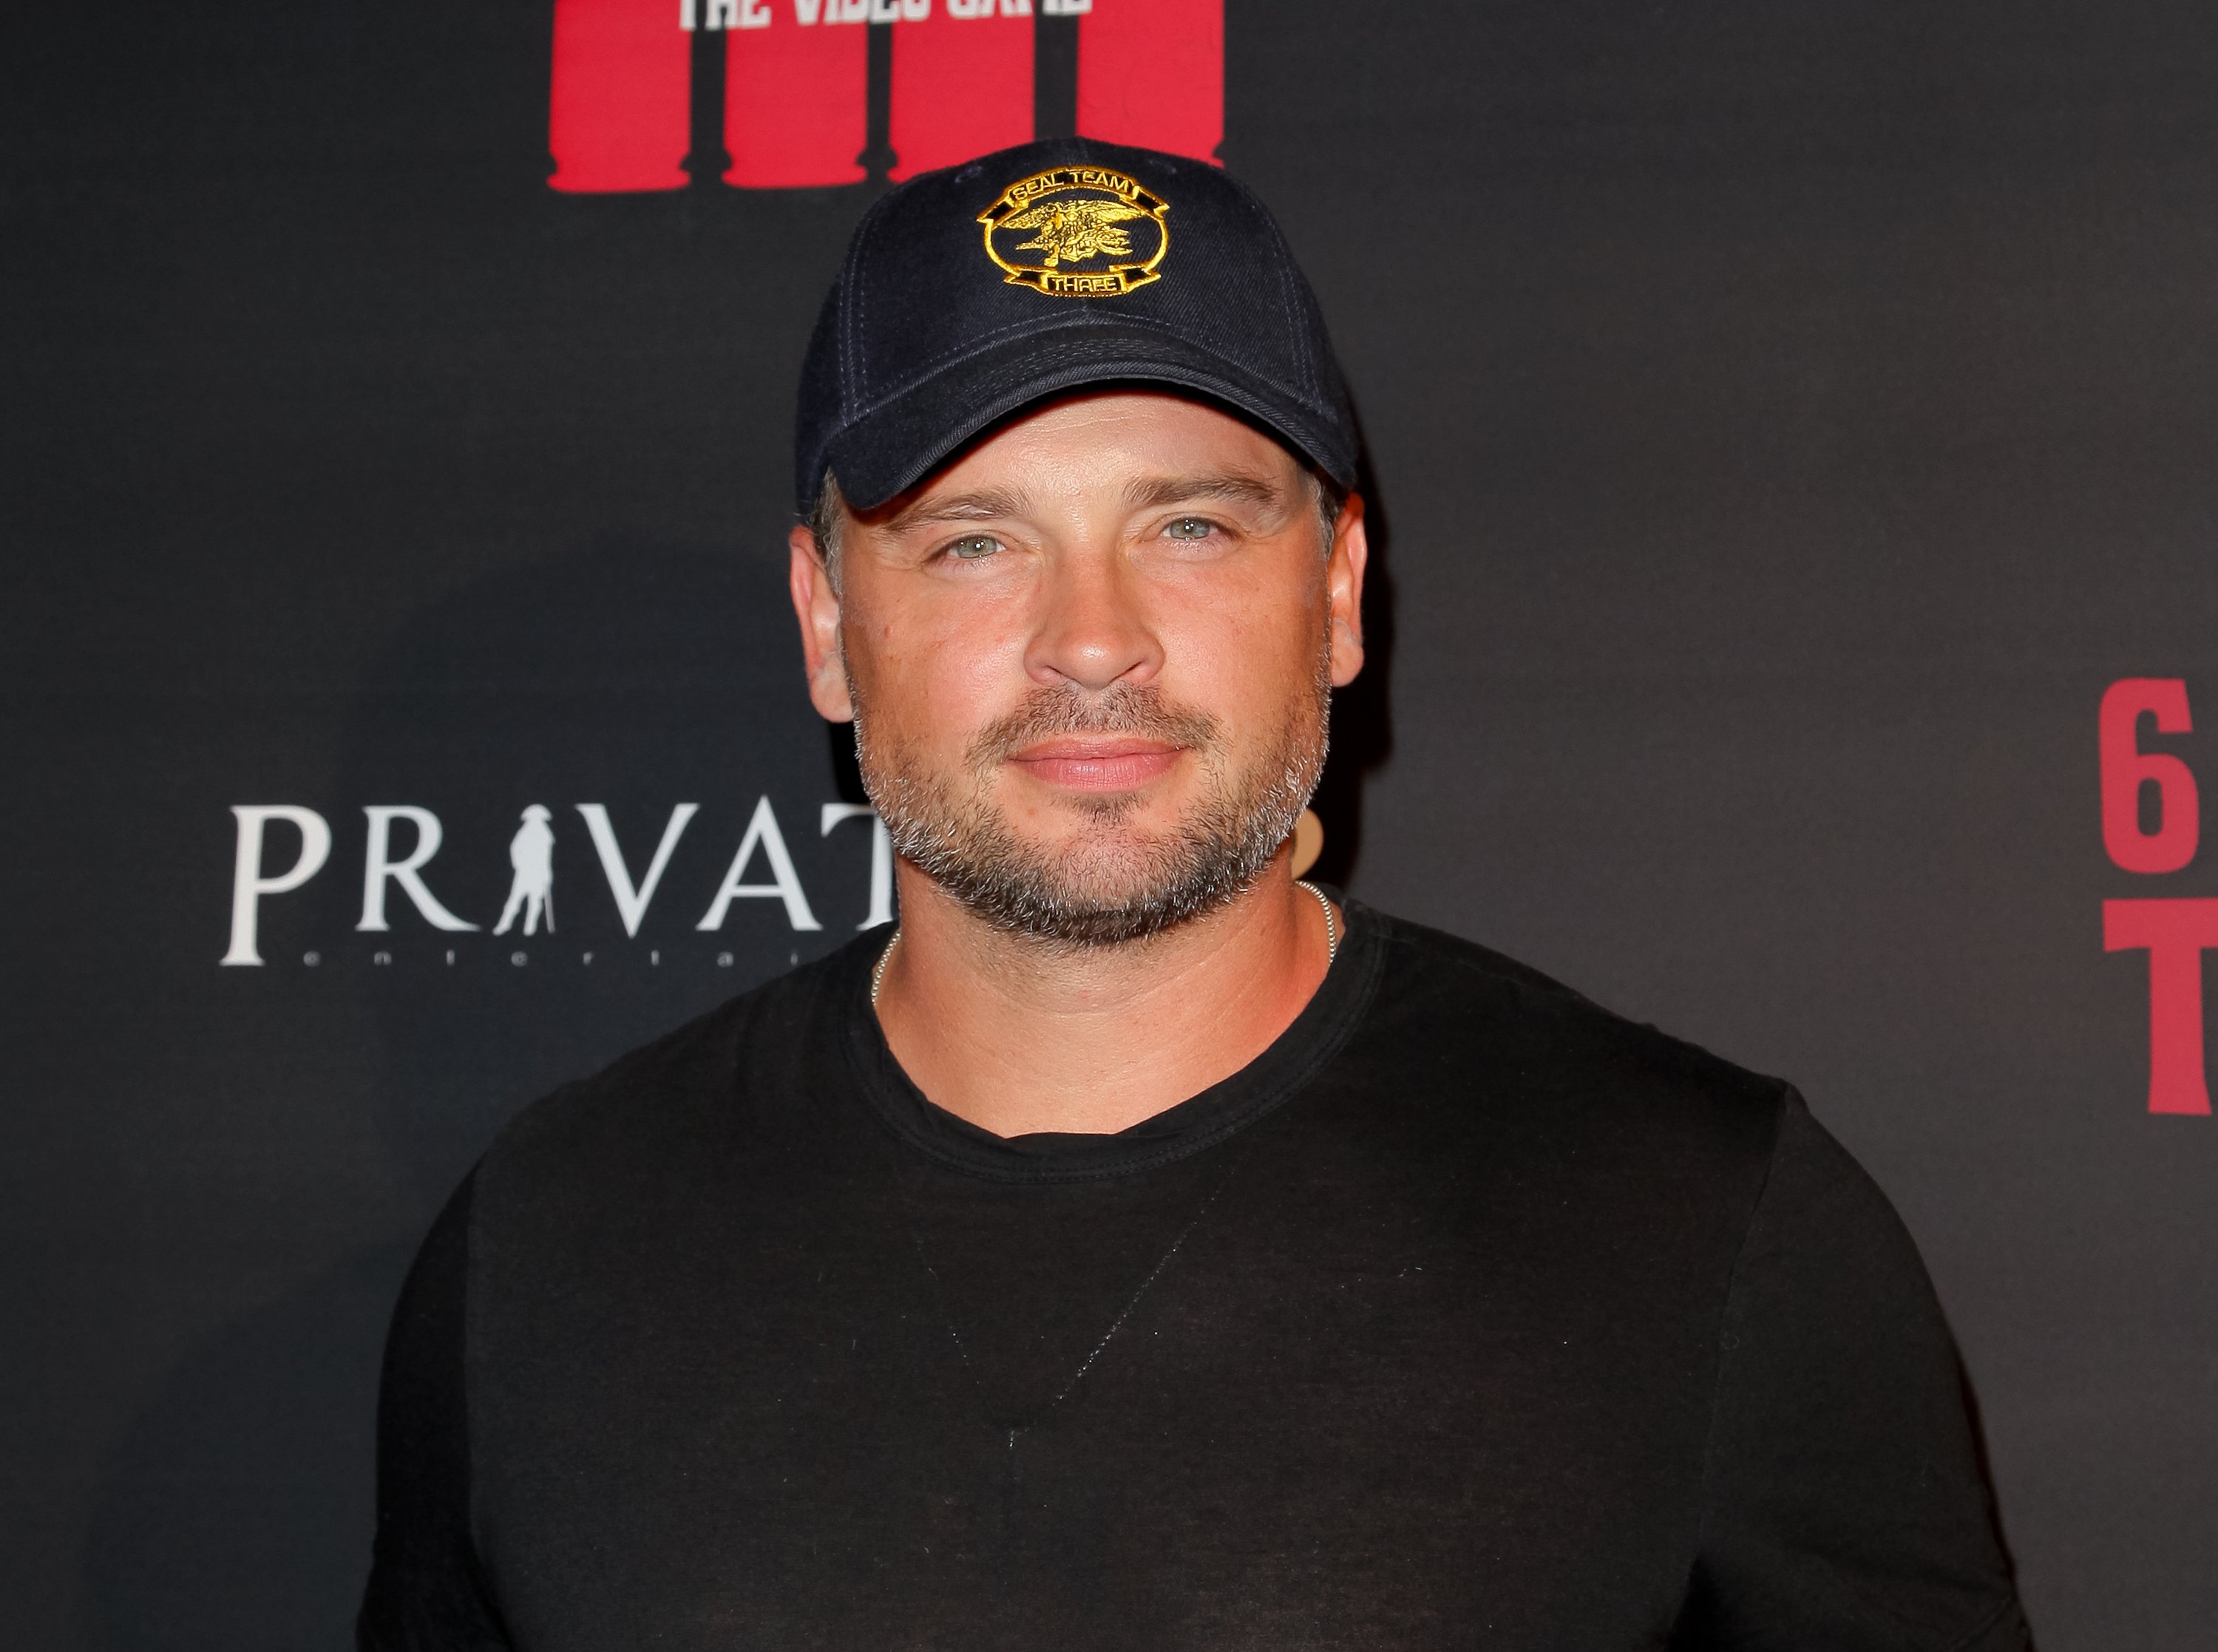 Tom Welling attends the launch of "6 Bullets To Hell" on May 10, 2016 in Los Angeles, California | Photo: Getty Images